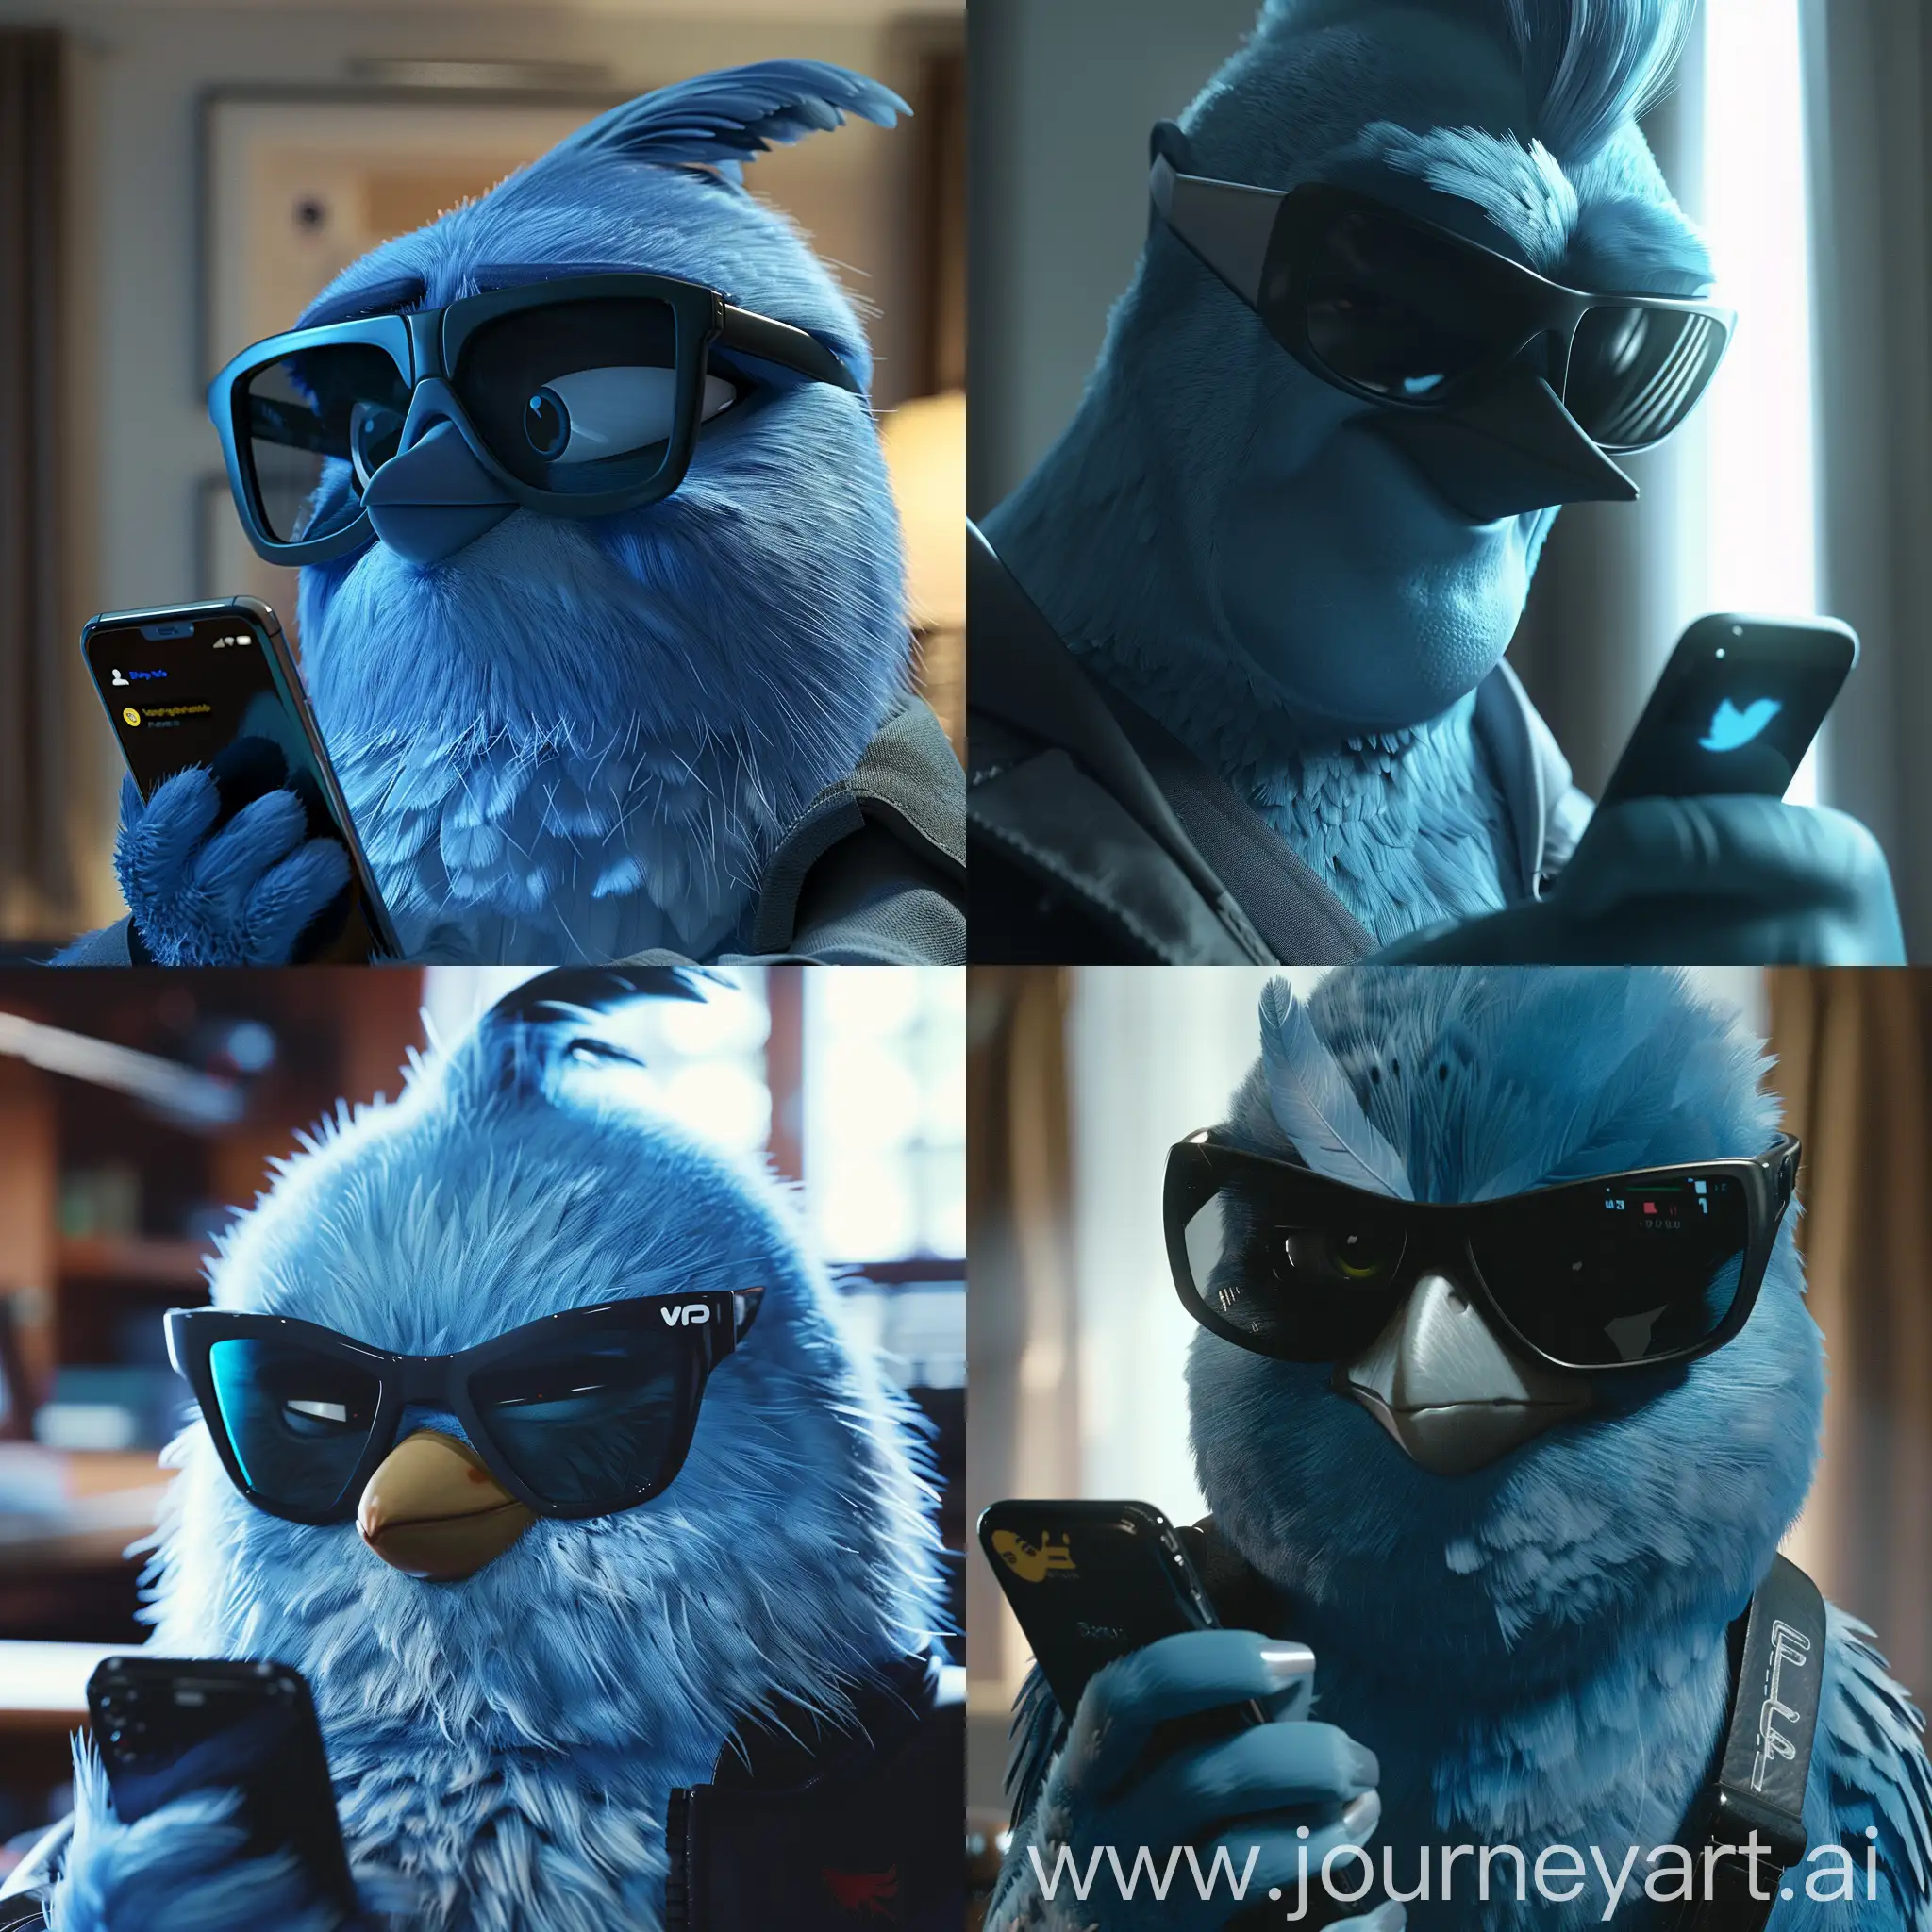 Cool-Blue-Bird-with-Black-Sunglasses-Shows-Phone-Screen